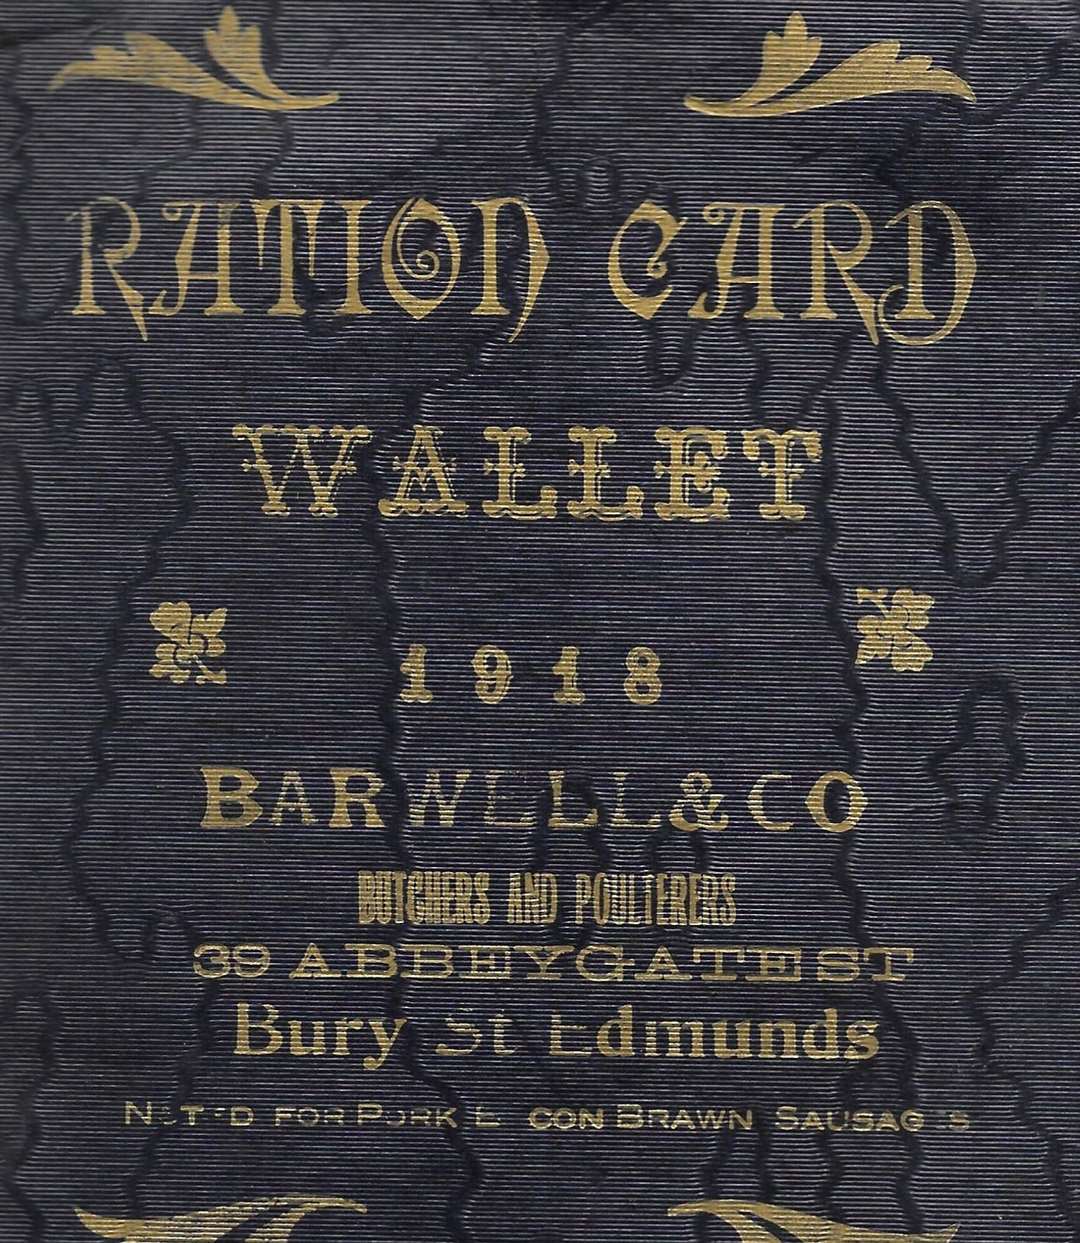 Rationing did not start until 1918 and Bury's Barwell & Co produced a wallet for ration cards